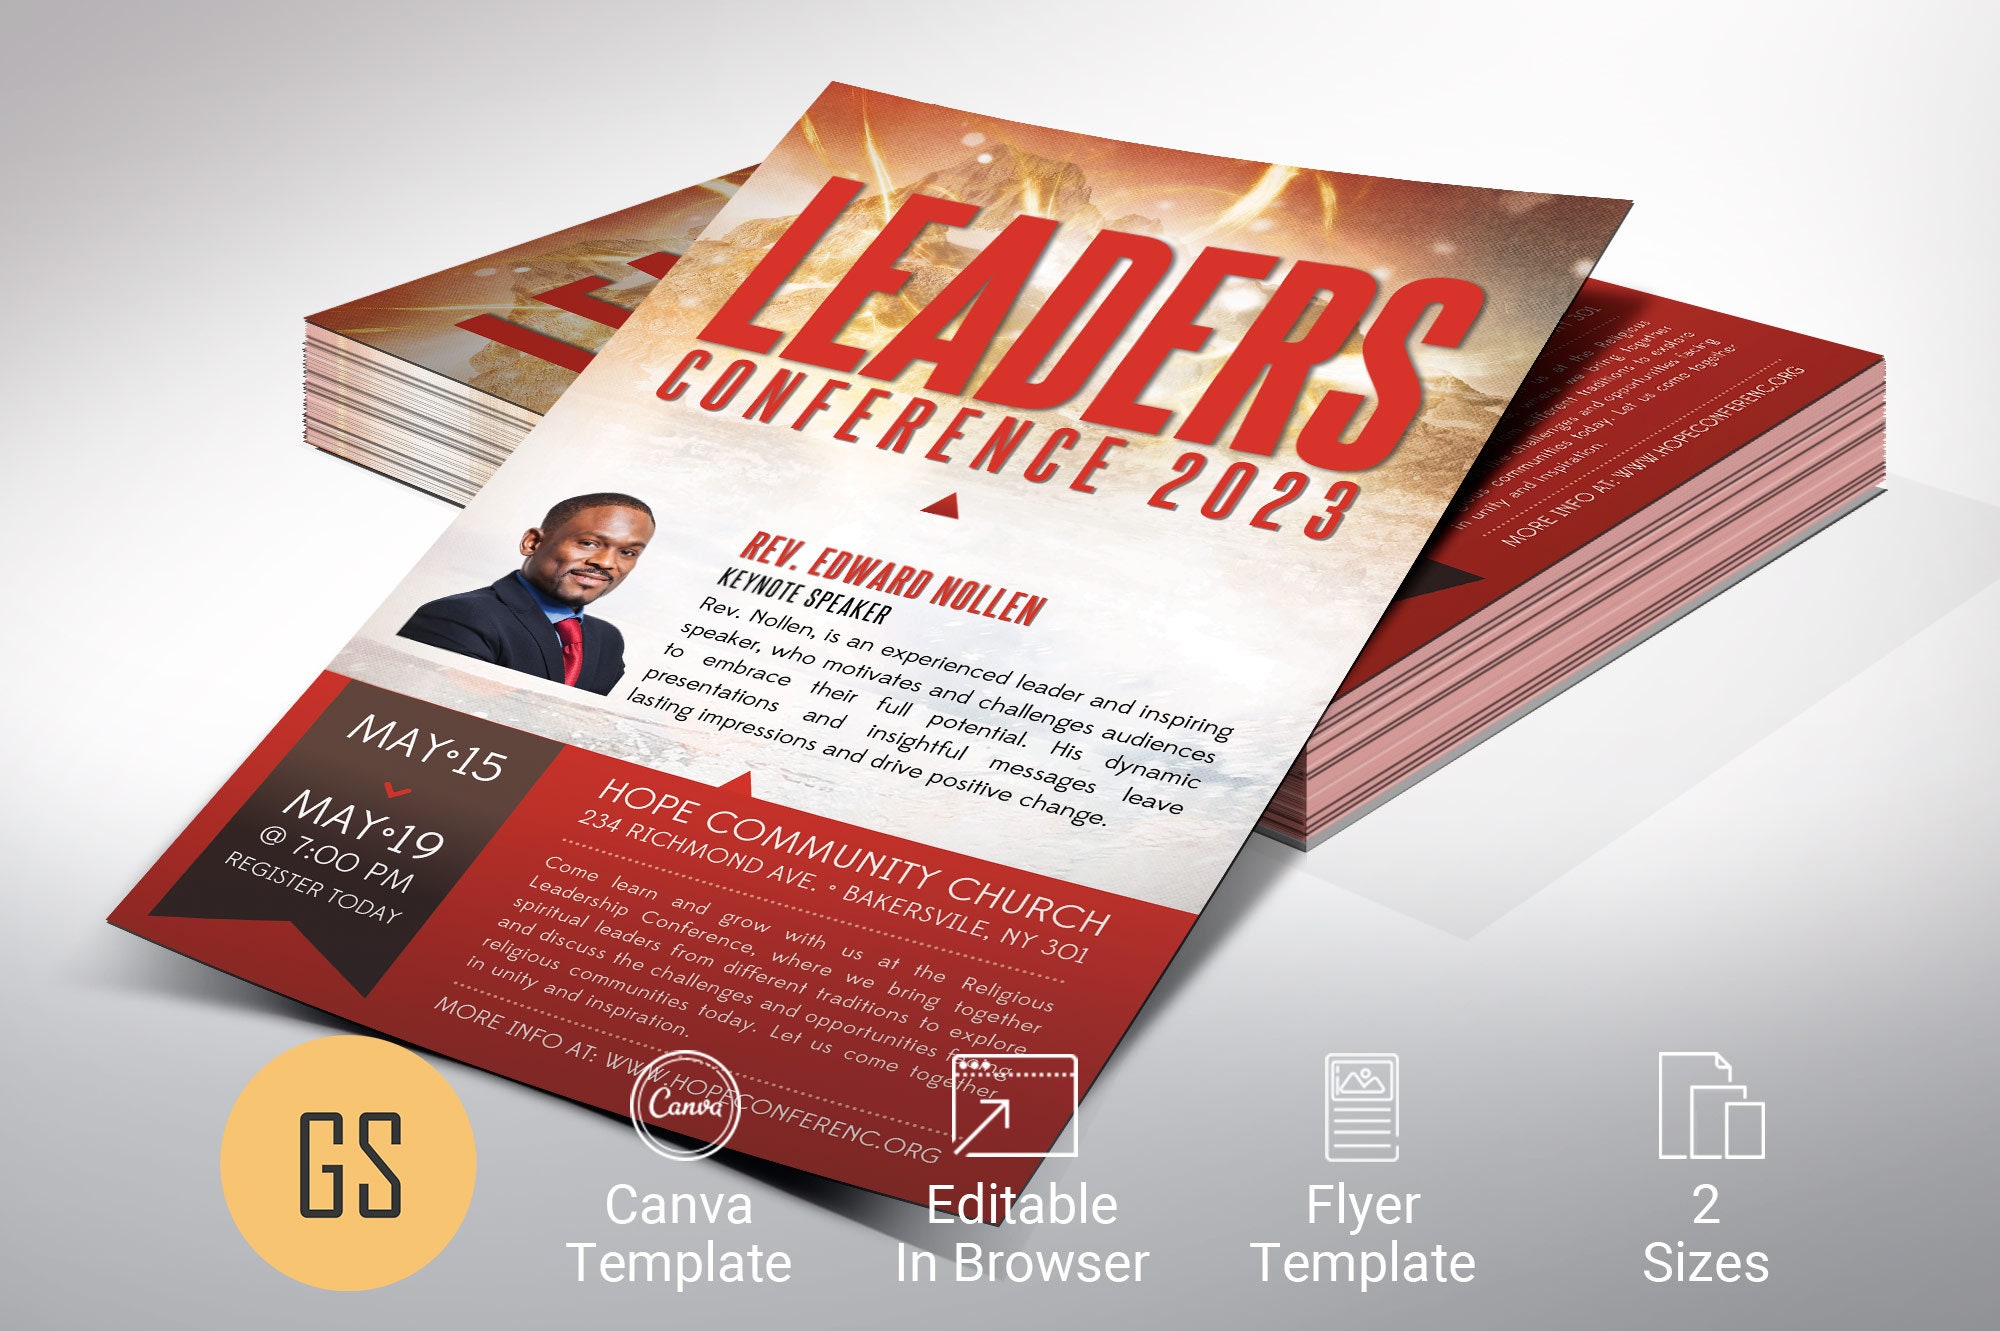 Leadership Training Church Flyer Template, Canva Template Motivational  Speaking, Leadership Conferences 2 Sizes 